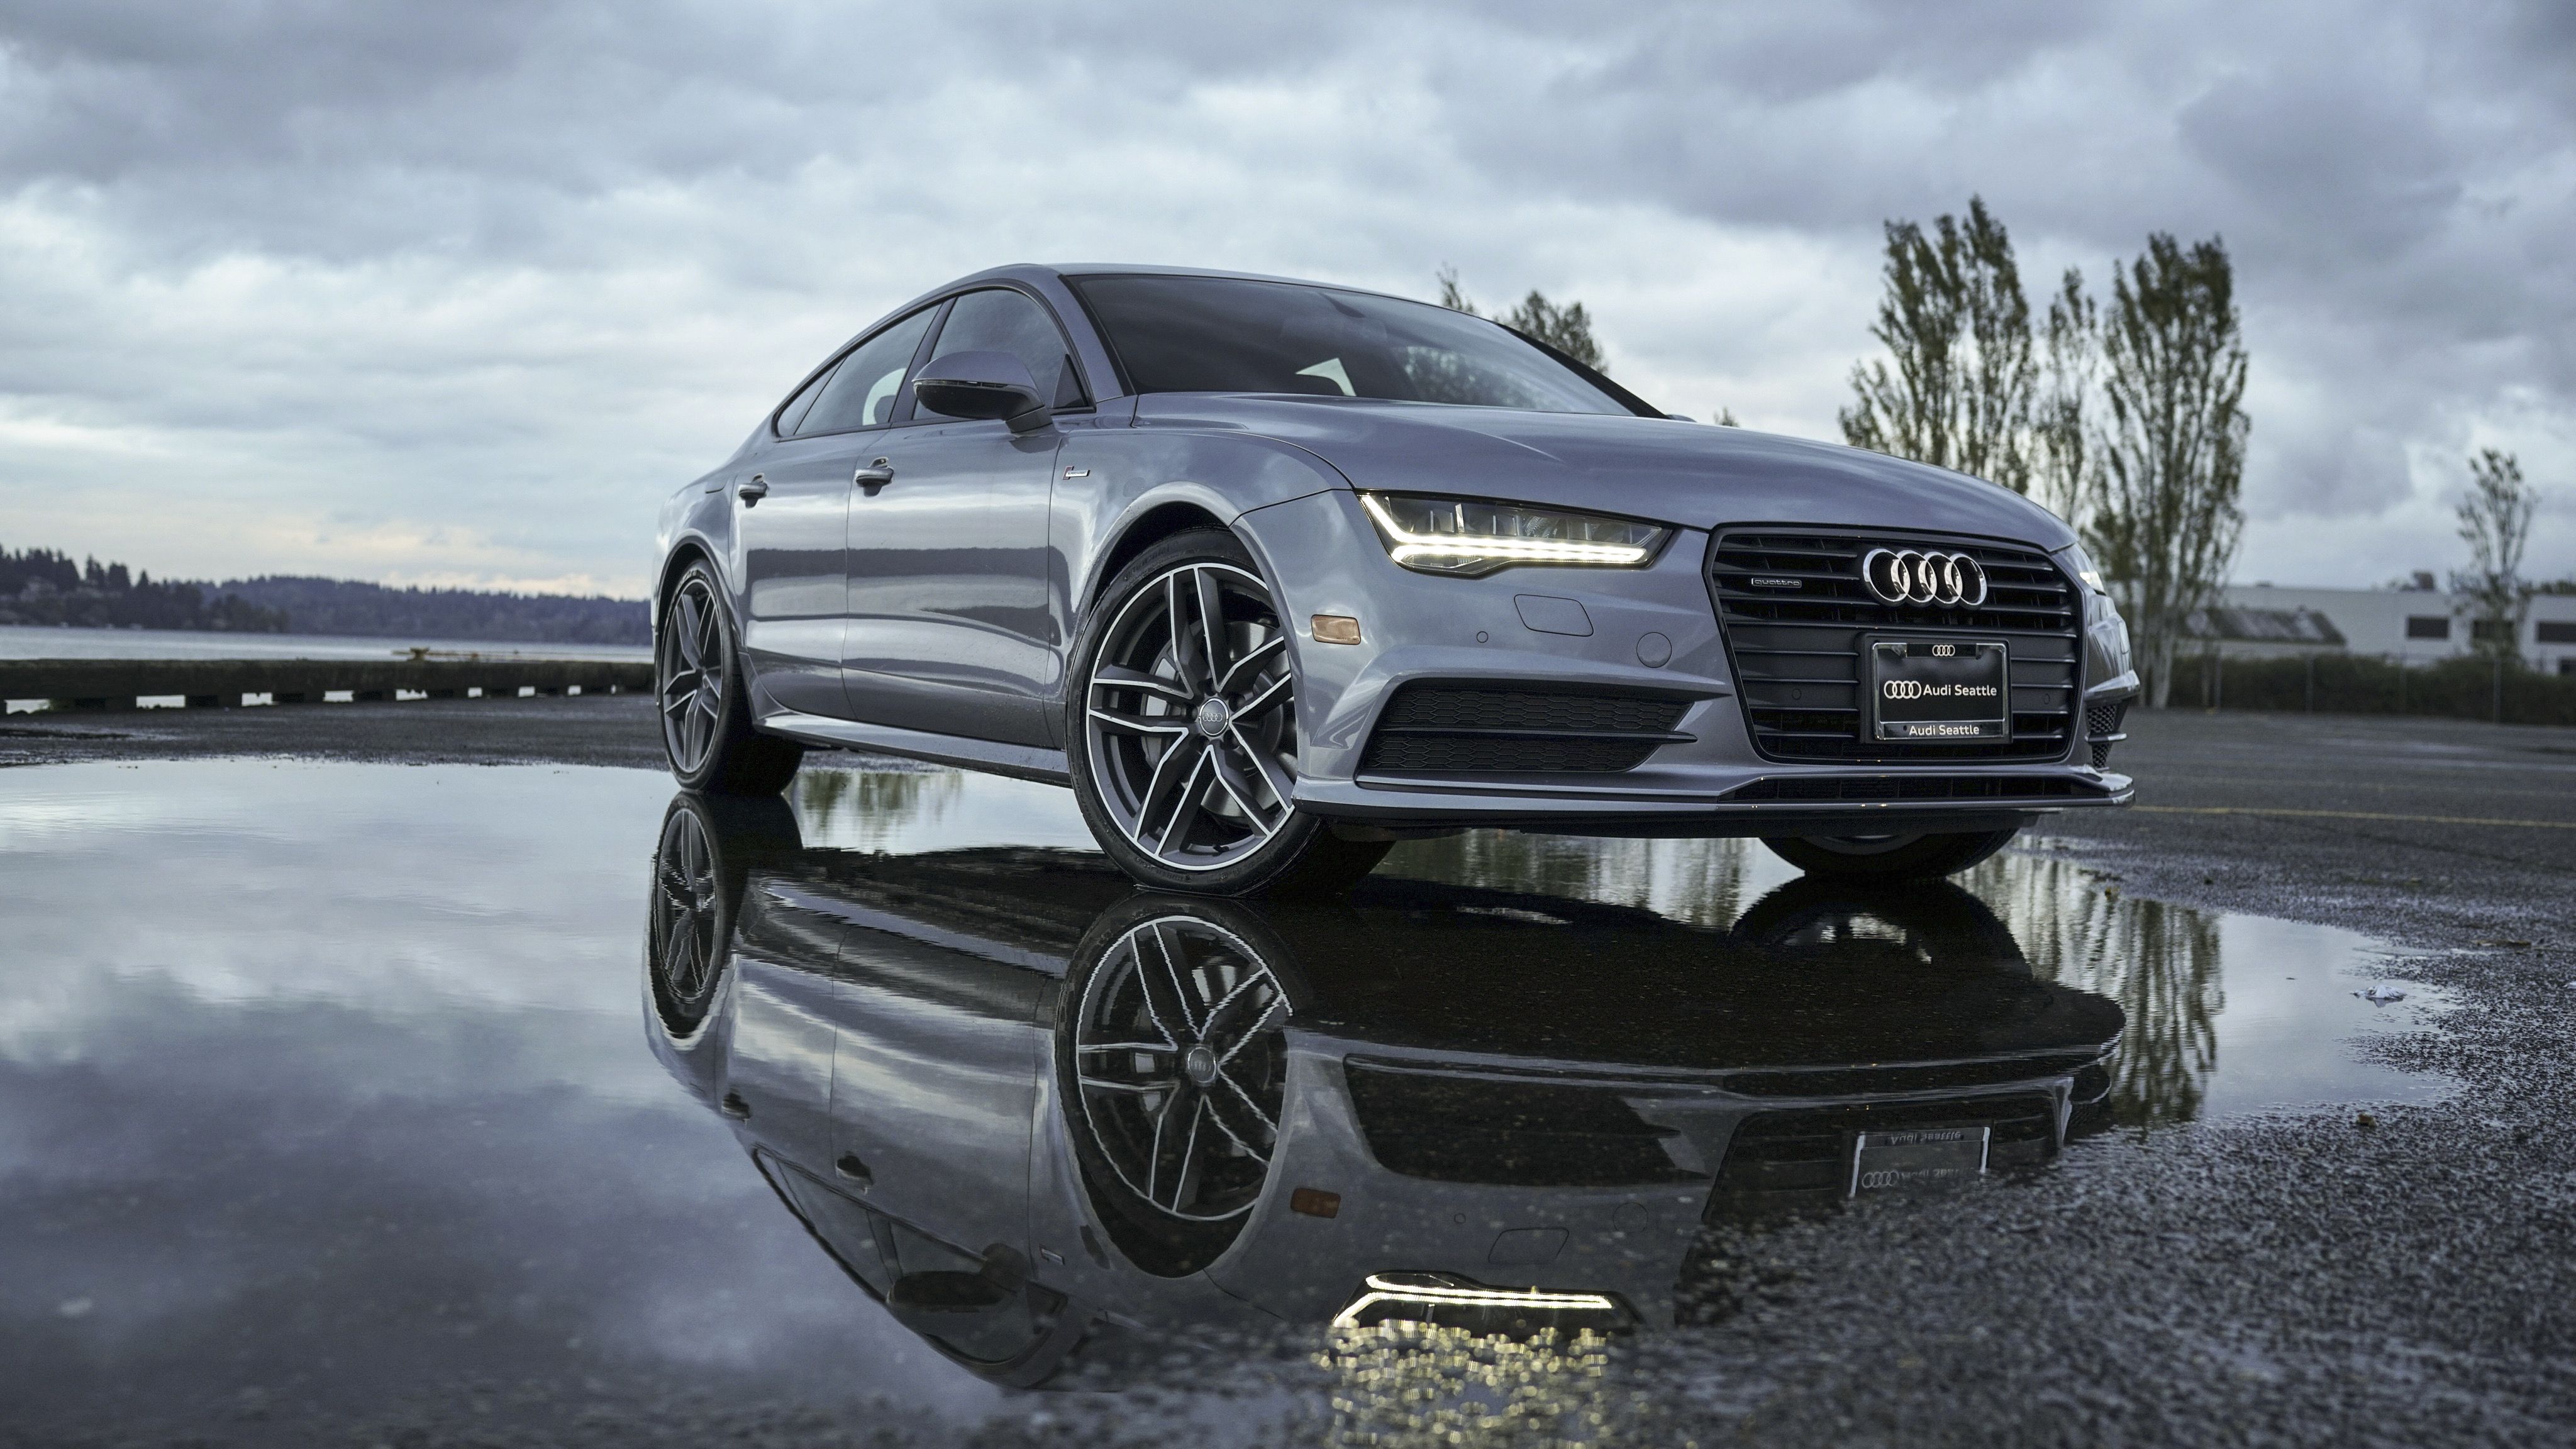 Free download Your Ridiculously Awesome Audi A7 Wallpaper Is Here [4096x2304] for your Desktop, Mobile & Tablet. Explore Audi A7 Wallpaper. Audi A7 Wallpaper, Samsung A7 Wallpaper, Audi